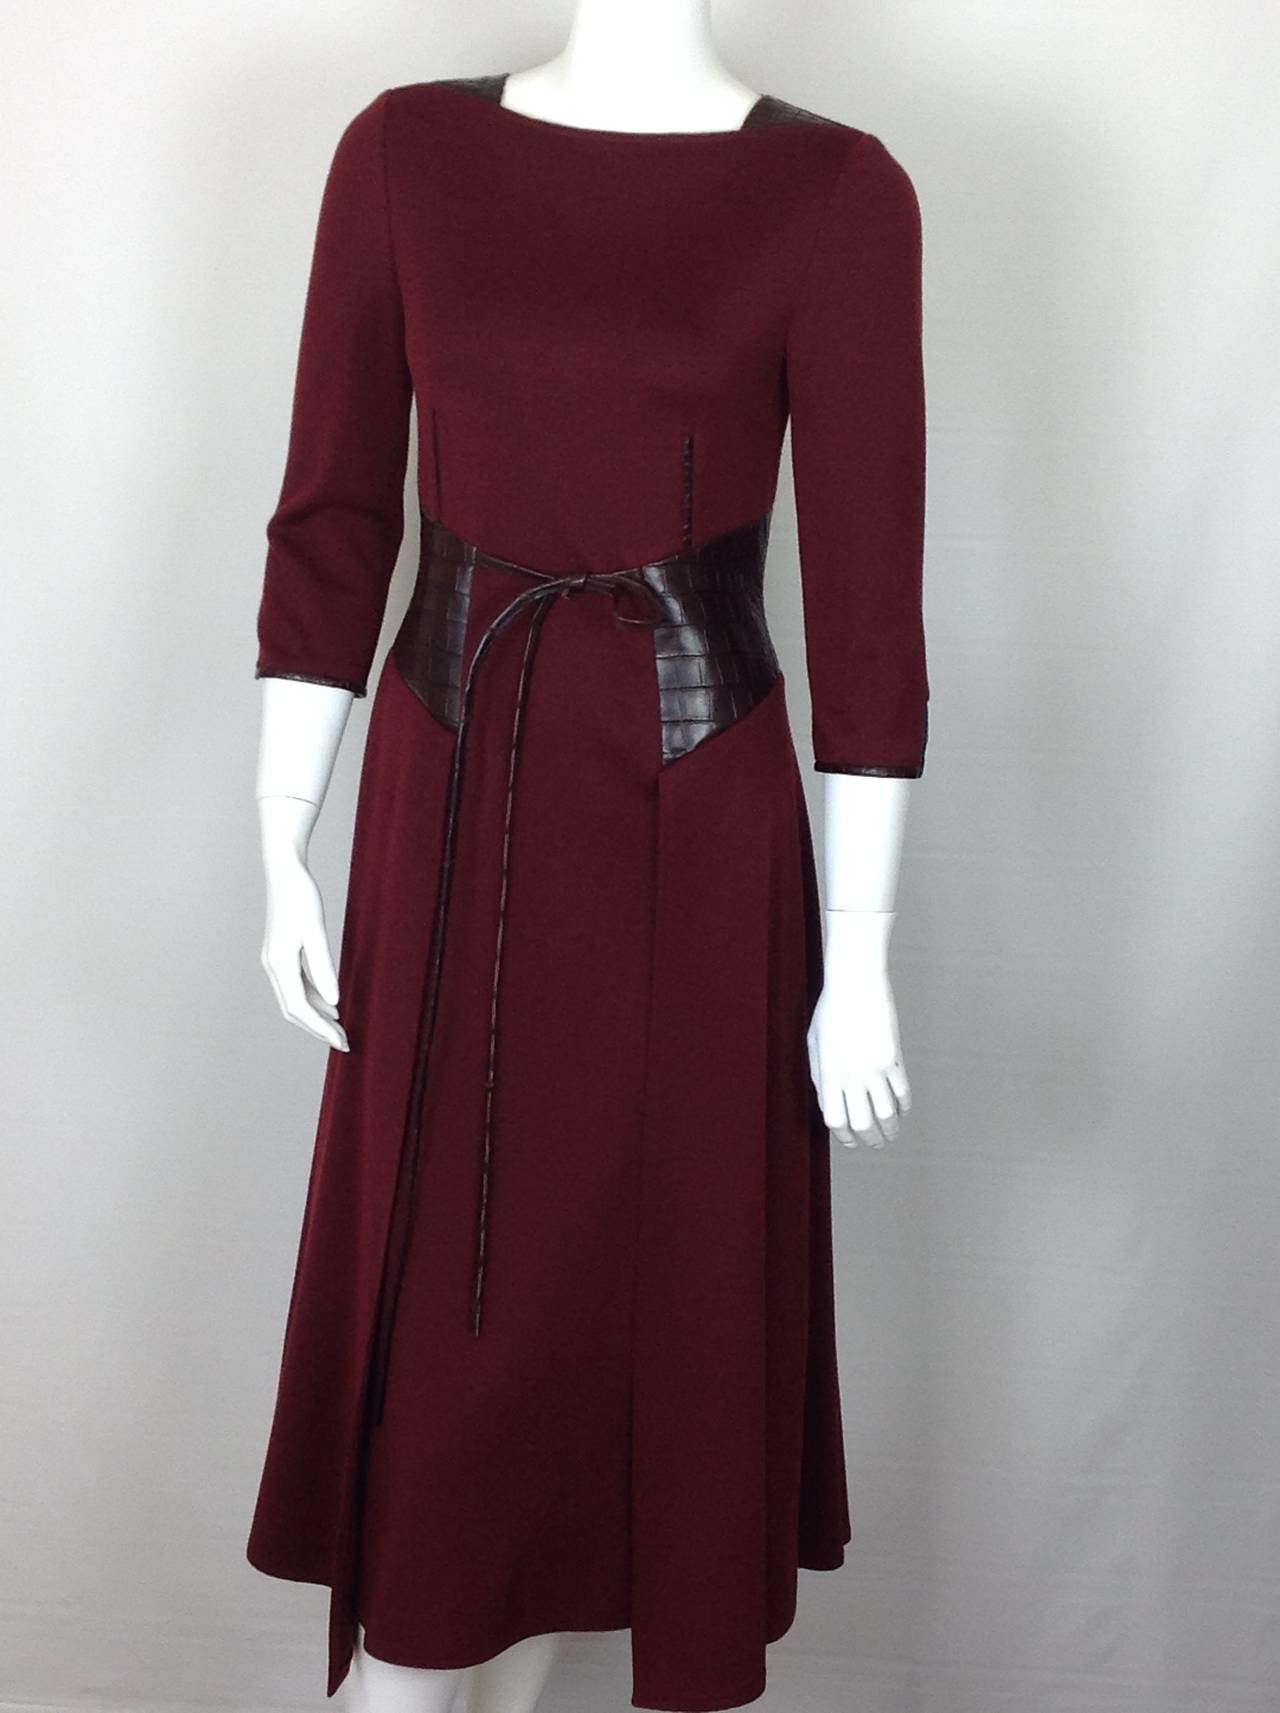 Ralph Rucci dress trimmed in leather 3